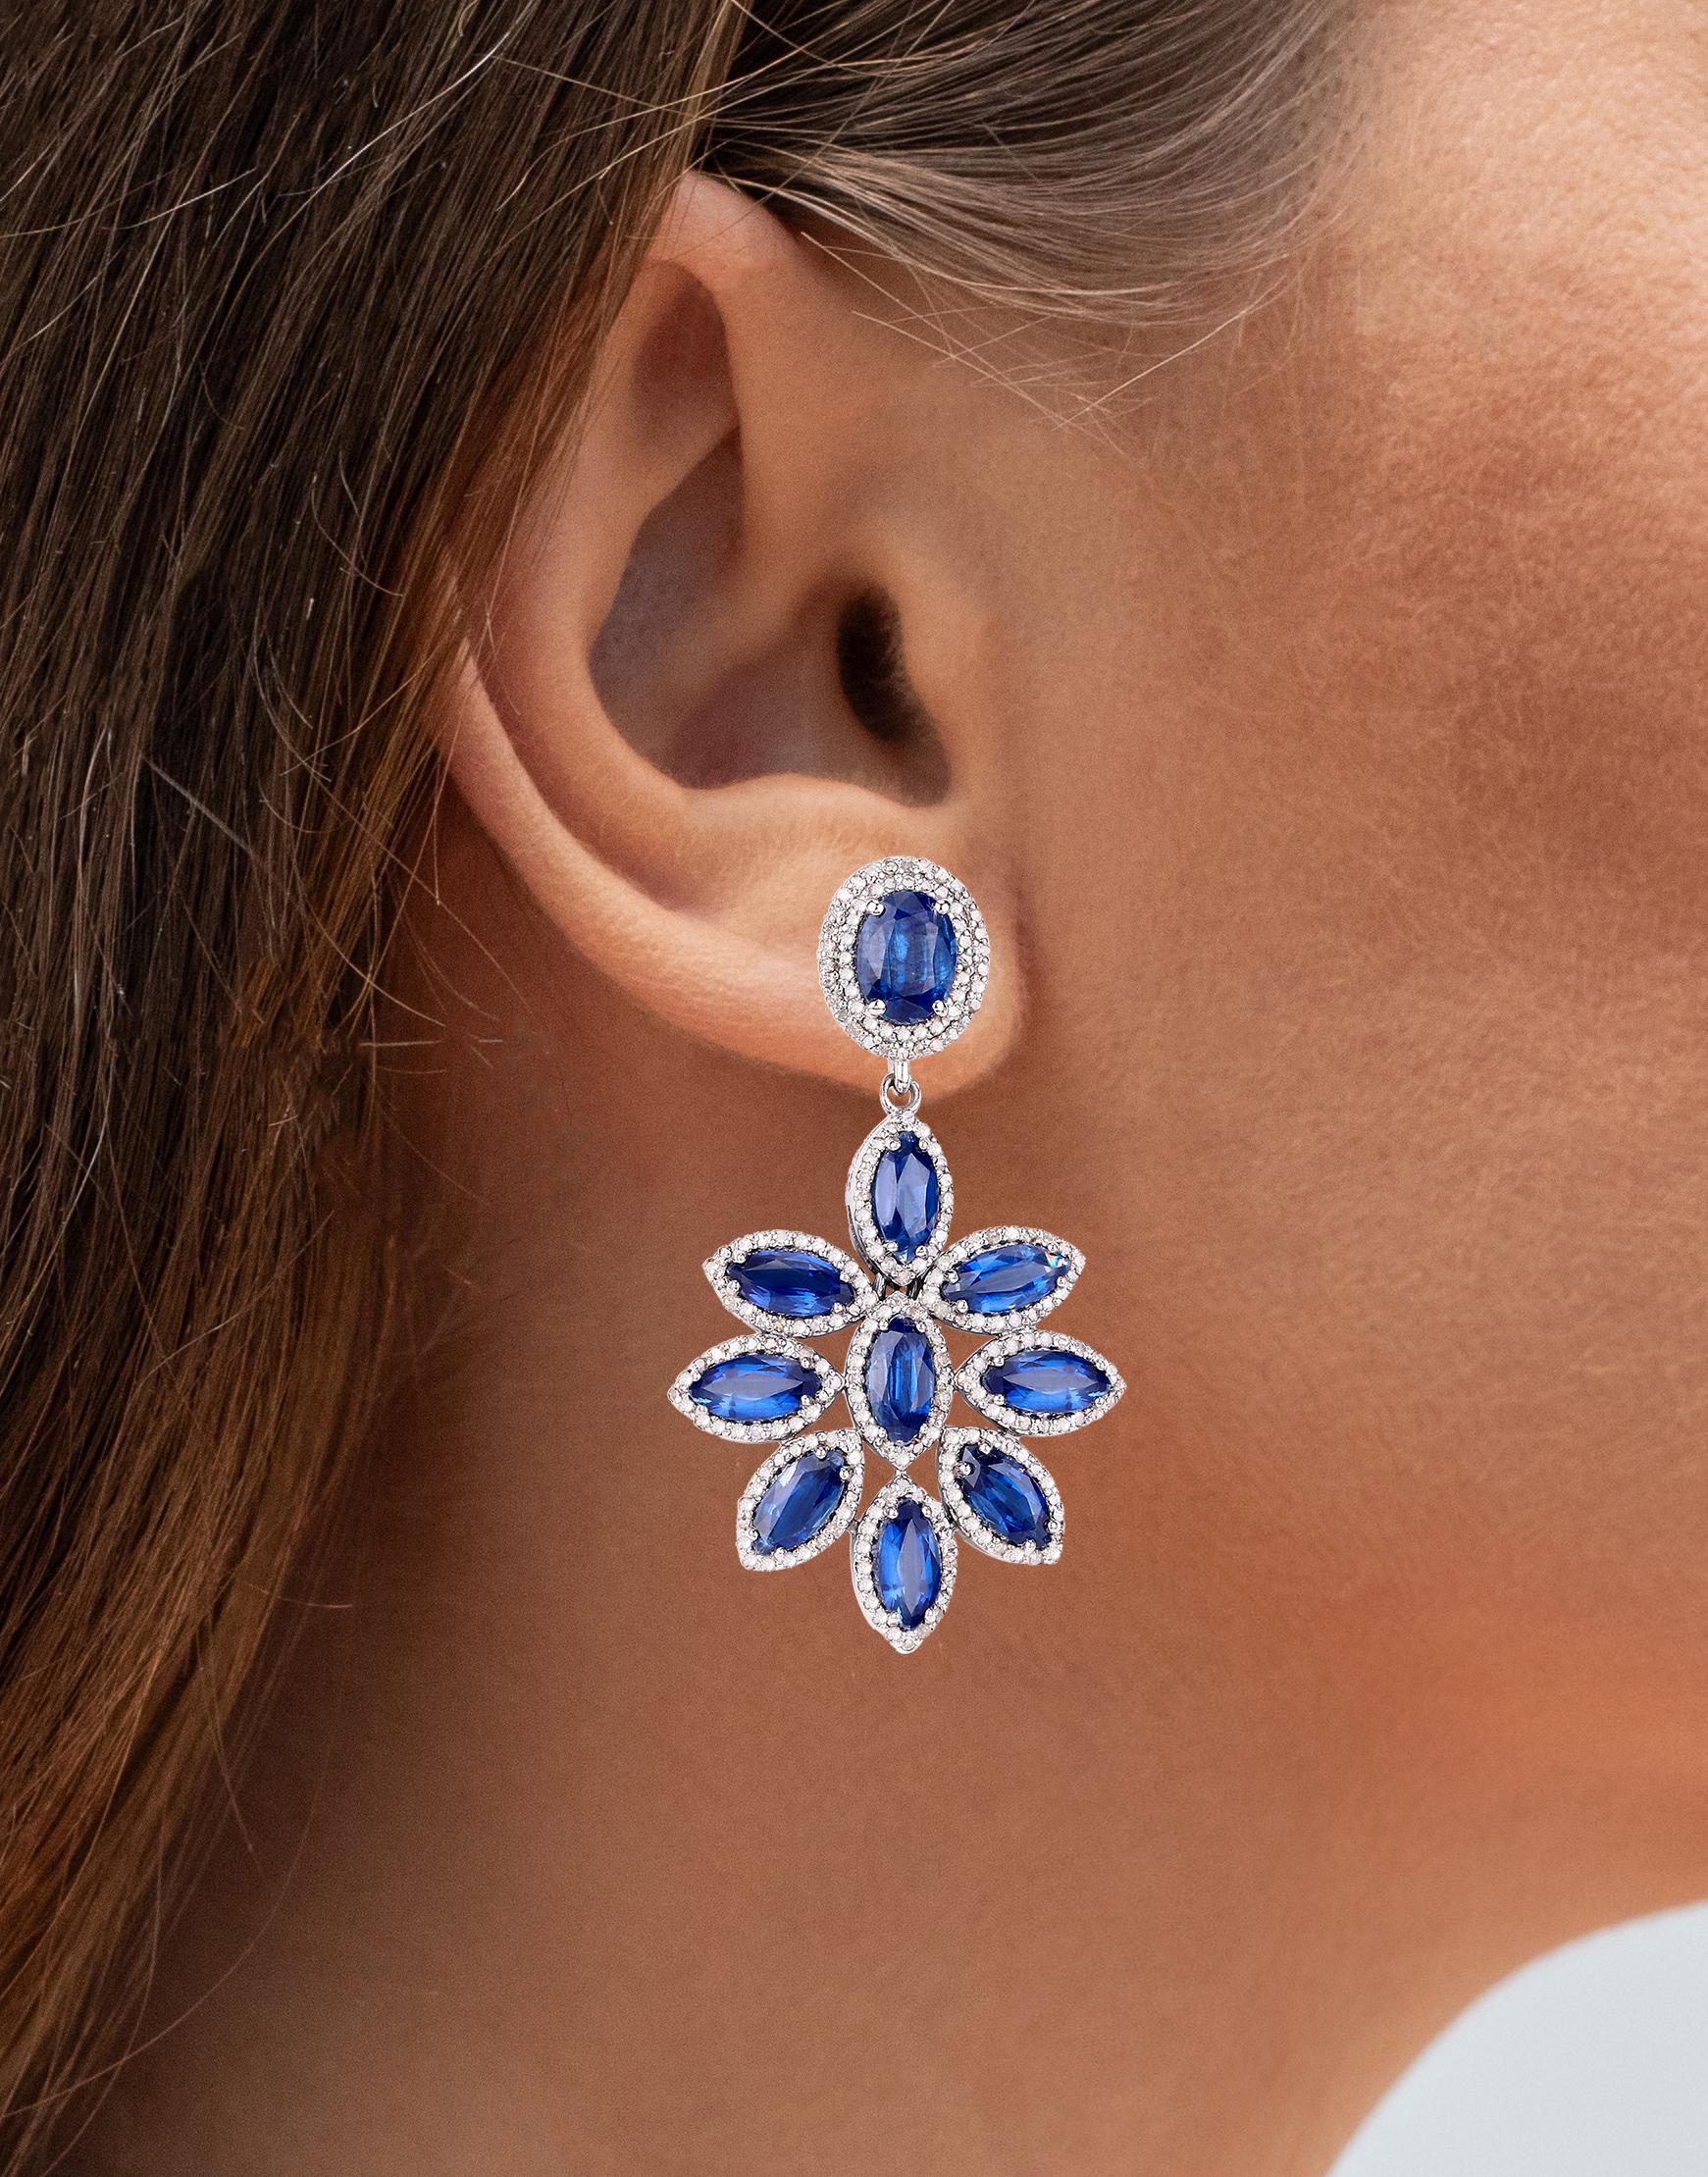 Contemporary Kyanite Floral Earrings With Diamonds 19.35 Carats Sterling Silver For Sale